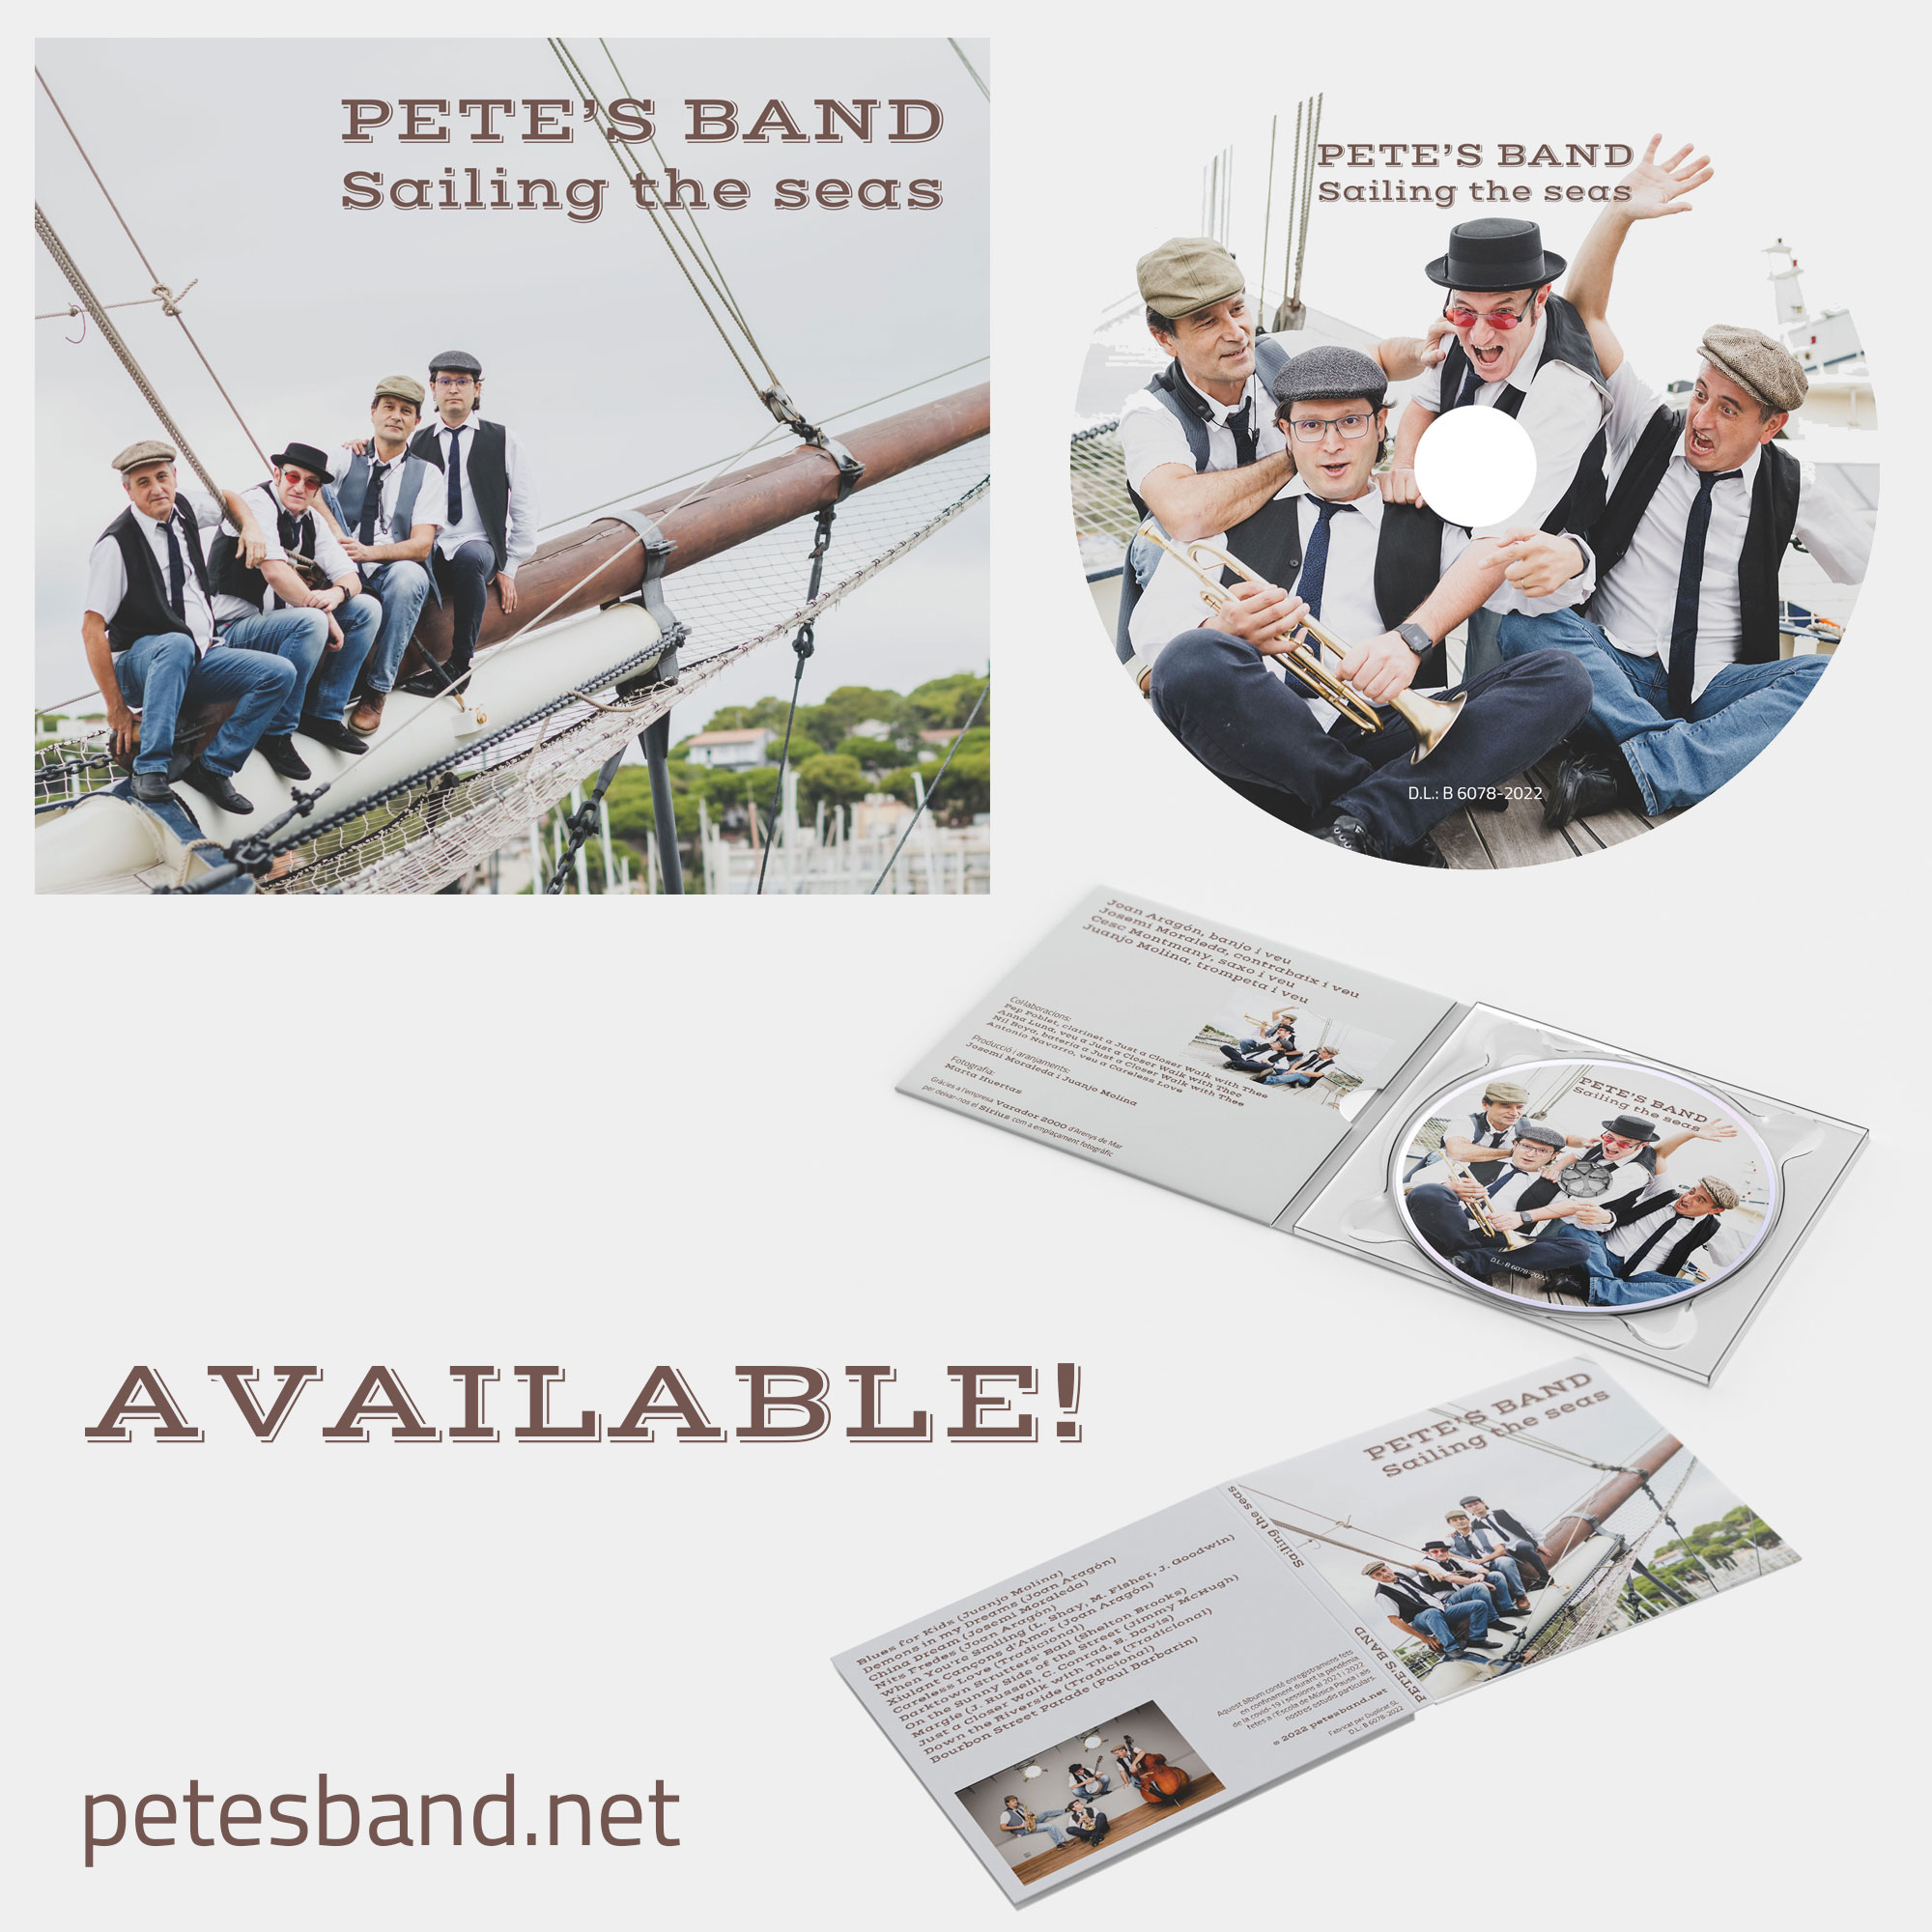 PETE'S BAND 